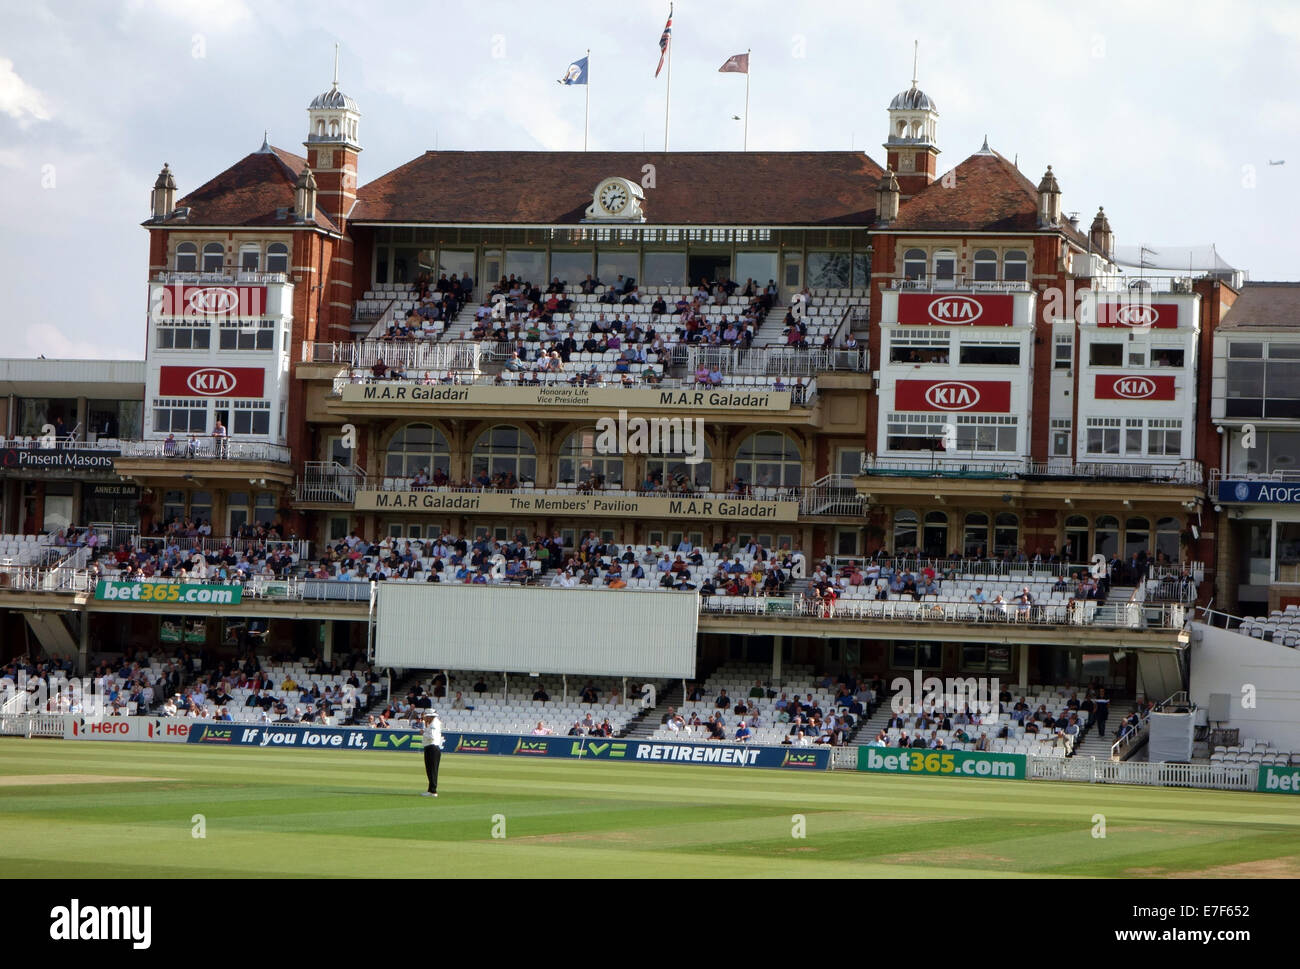 The Pavilion at the Oval cricket ground, London Stock Photo